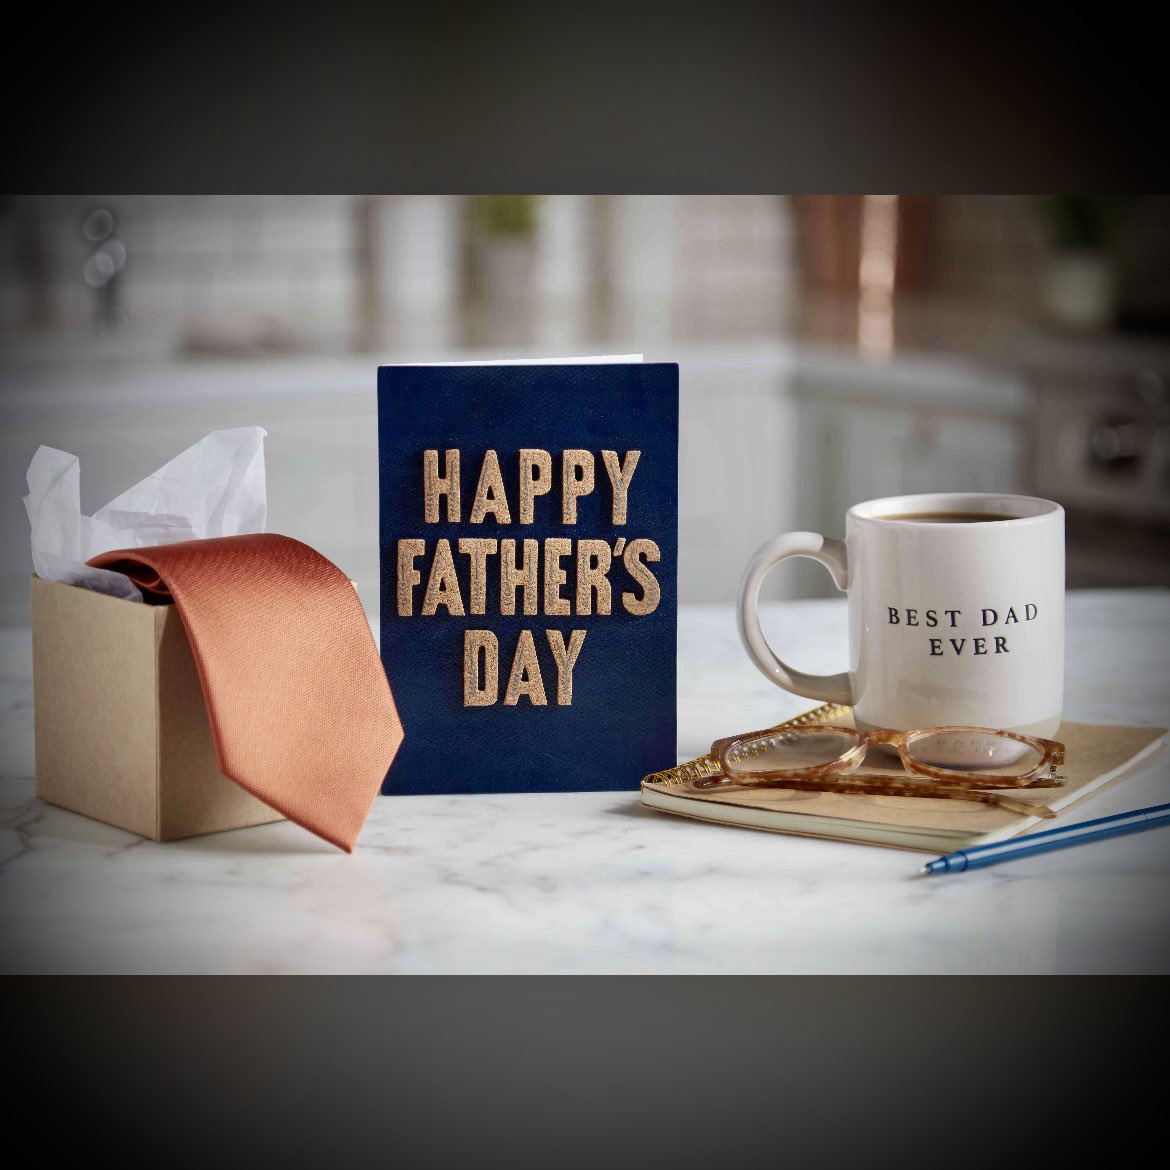 Happy Father’s Day to all dads and father figures! #fathersday #dad #happyfathersday #love #father #family #daddy #fathers #pops #fatherhood #fatherfigures #dadlife #uncle #son #brother #familytime #diadelpadre #dads #papa #christianlivingradio #christianlivingtv